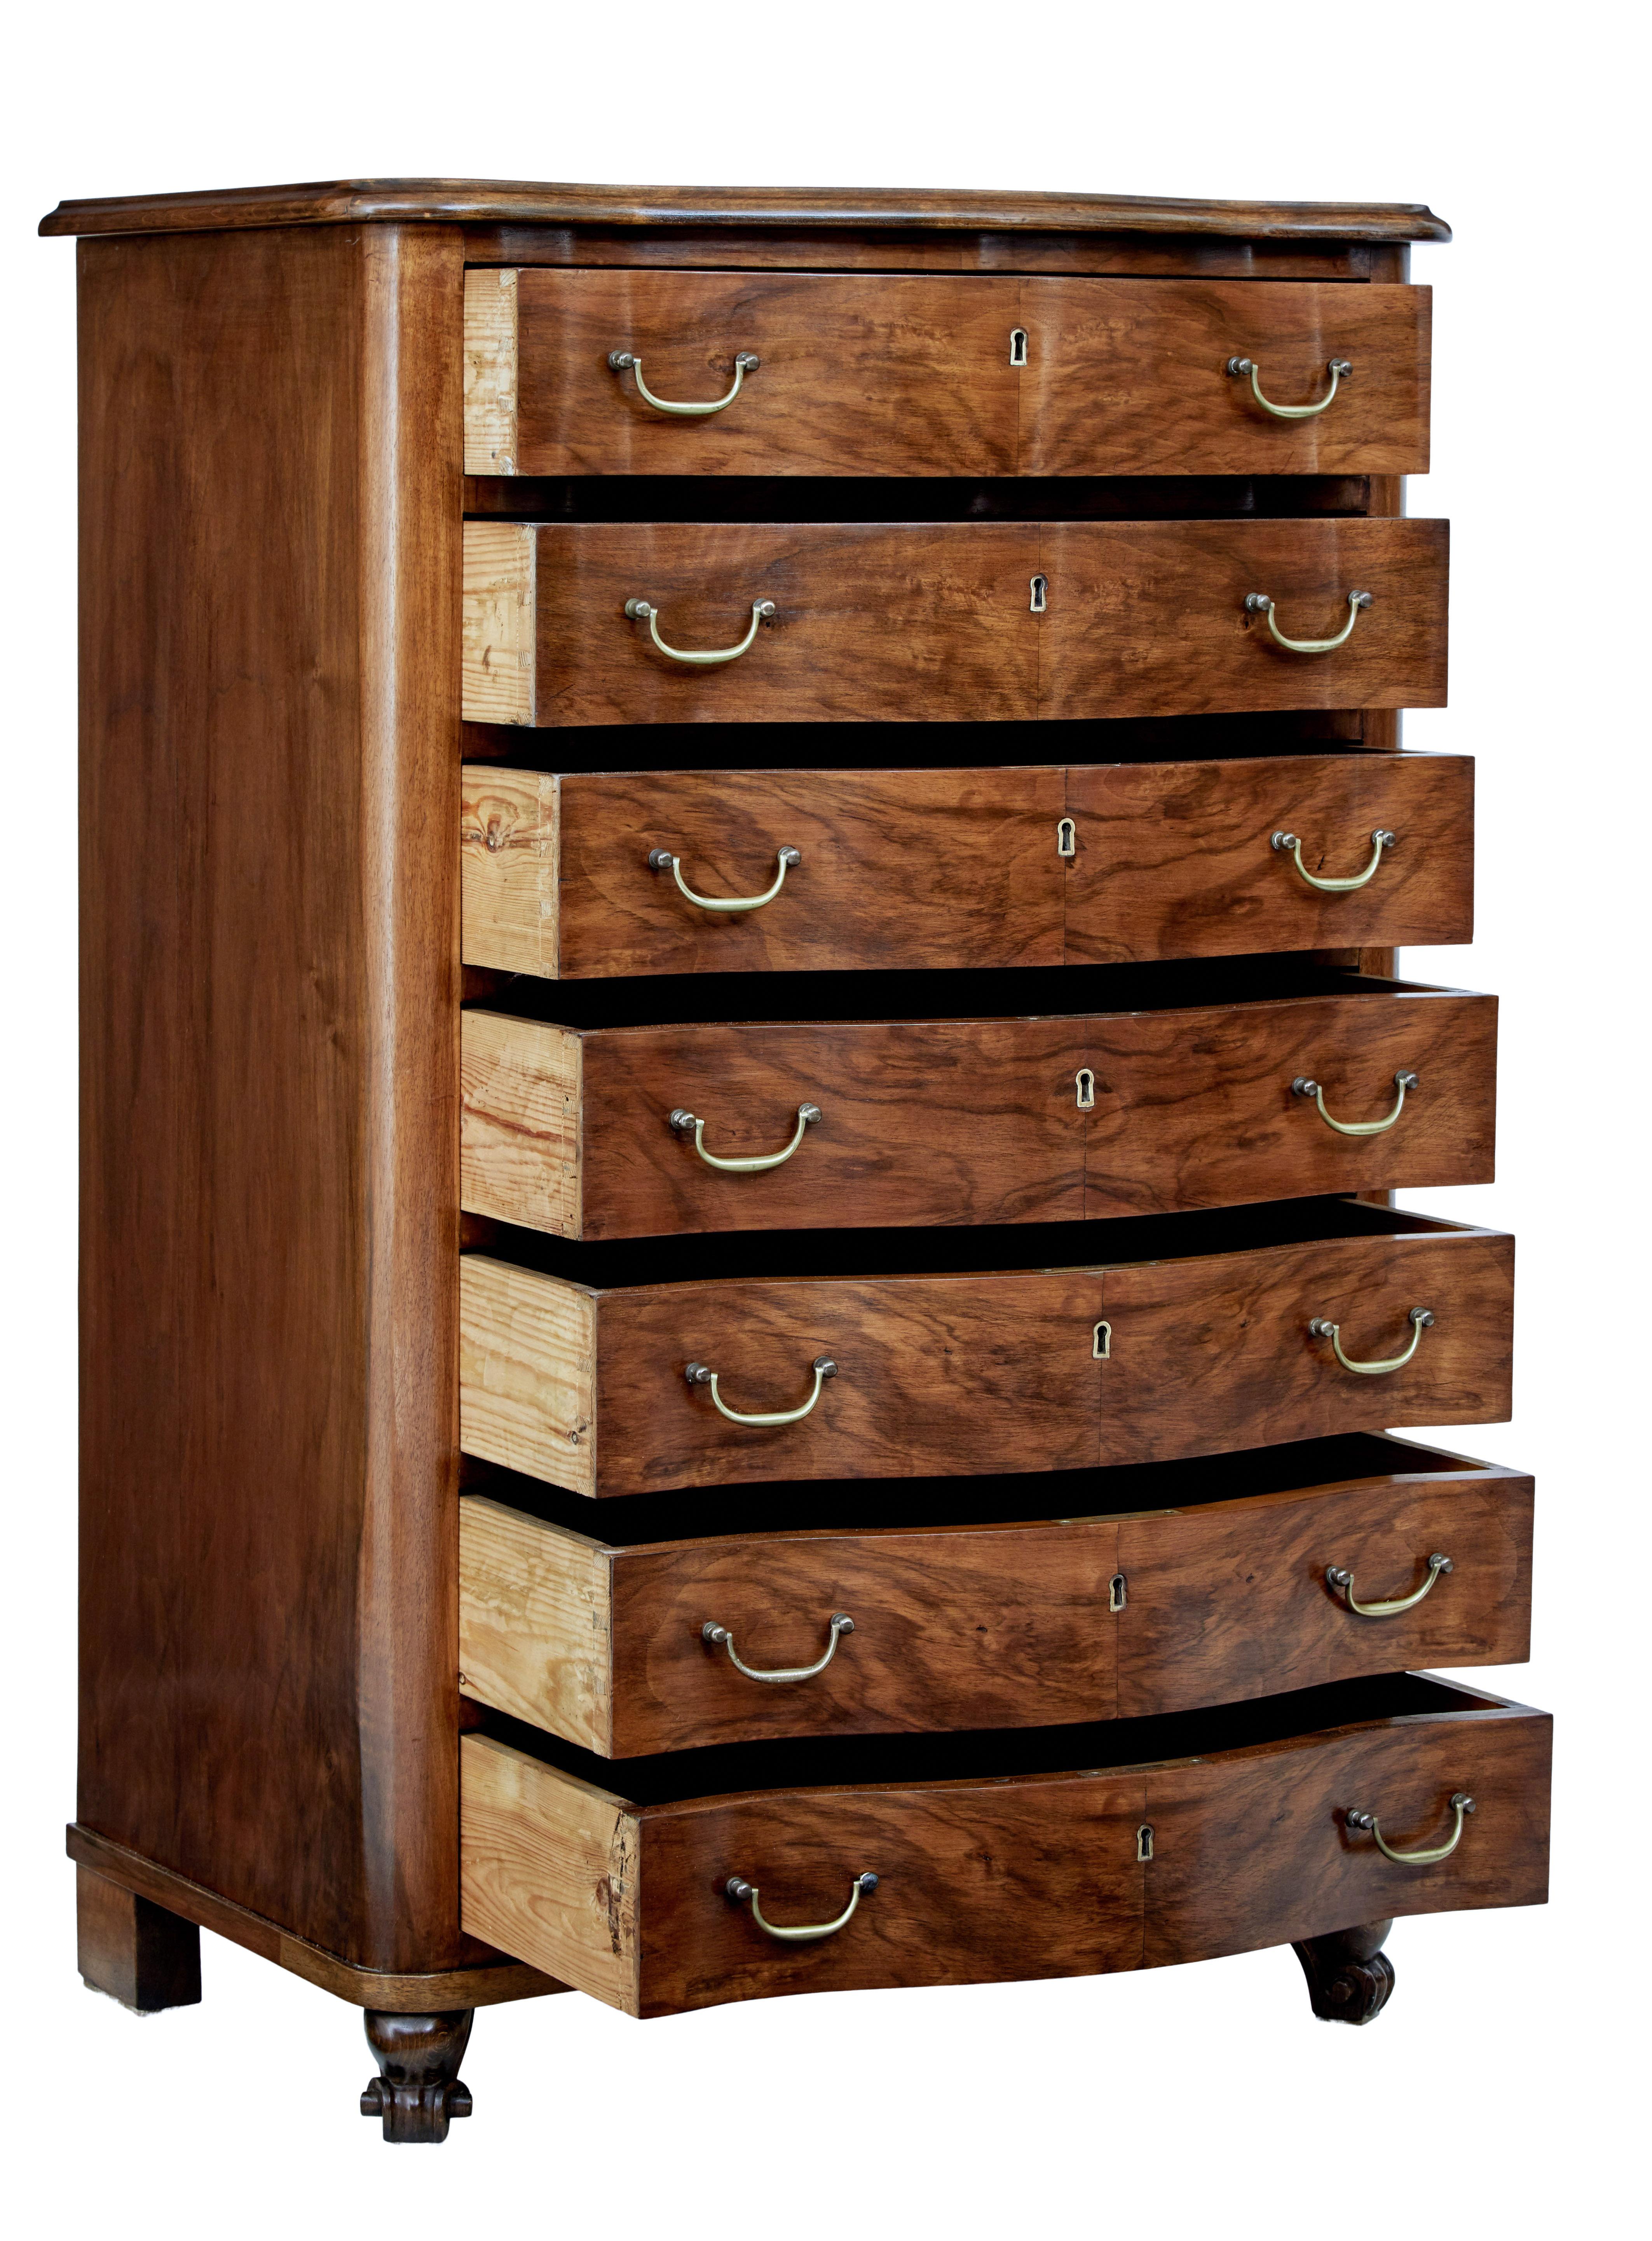 Mid-20th century walnut tall chest of drawers, circa 1950.

Fine quality serpentine shaped 7-drawer chest. All drawers of equal proportions with burr walnut veneers, each fitted with brass swan neck handles.

Standing on carved front legs, with